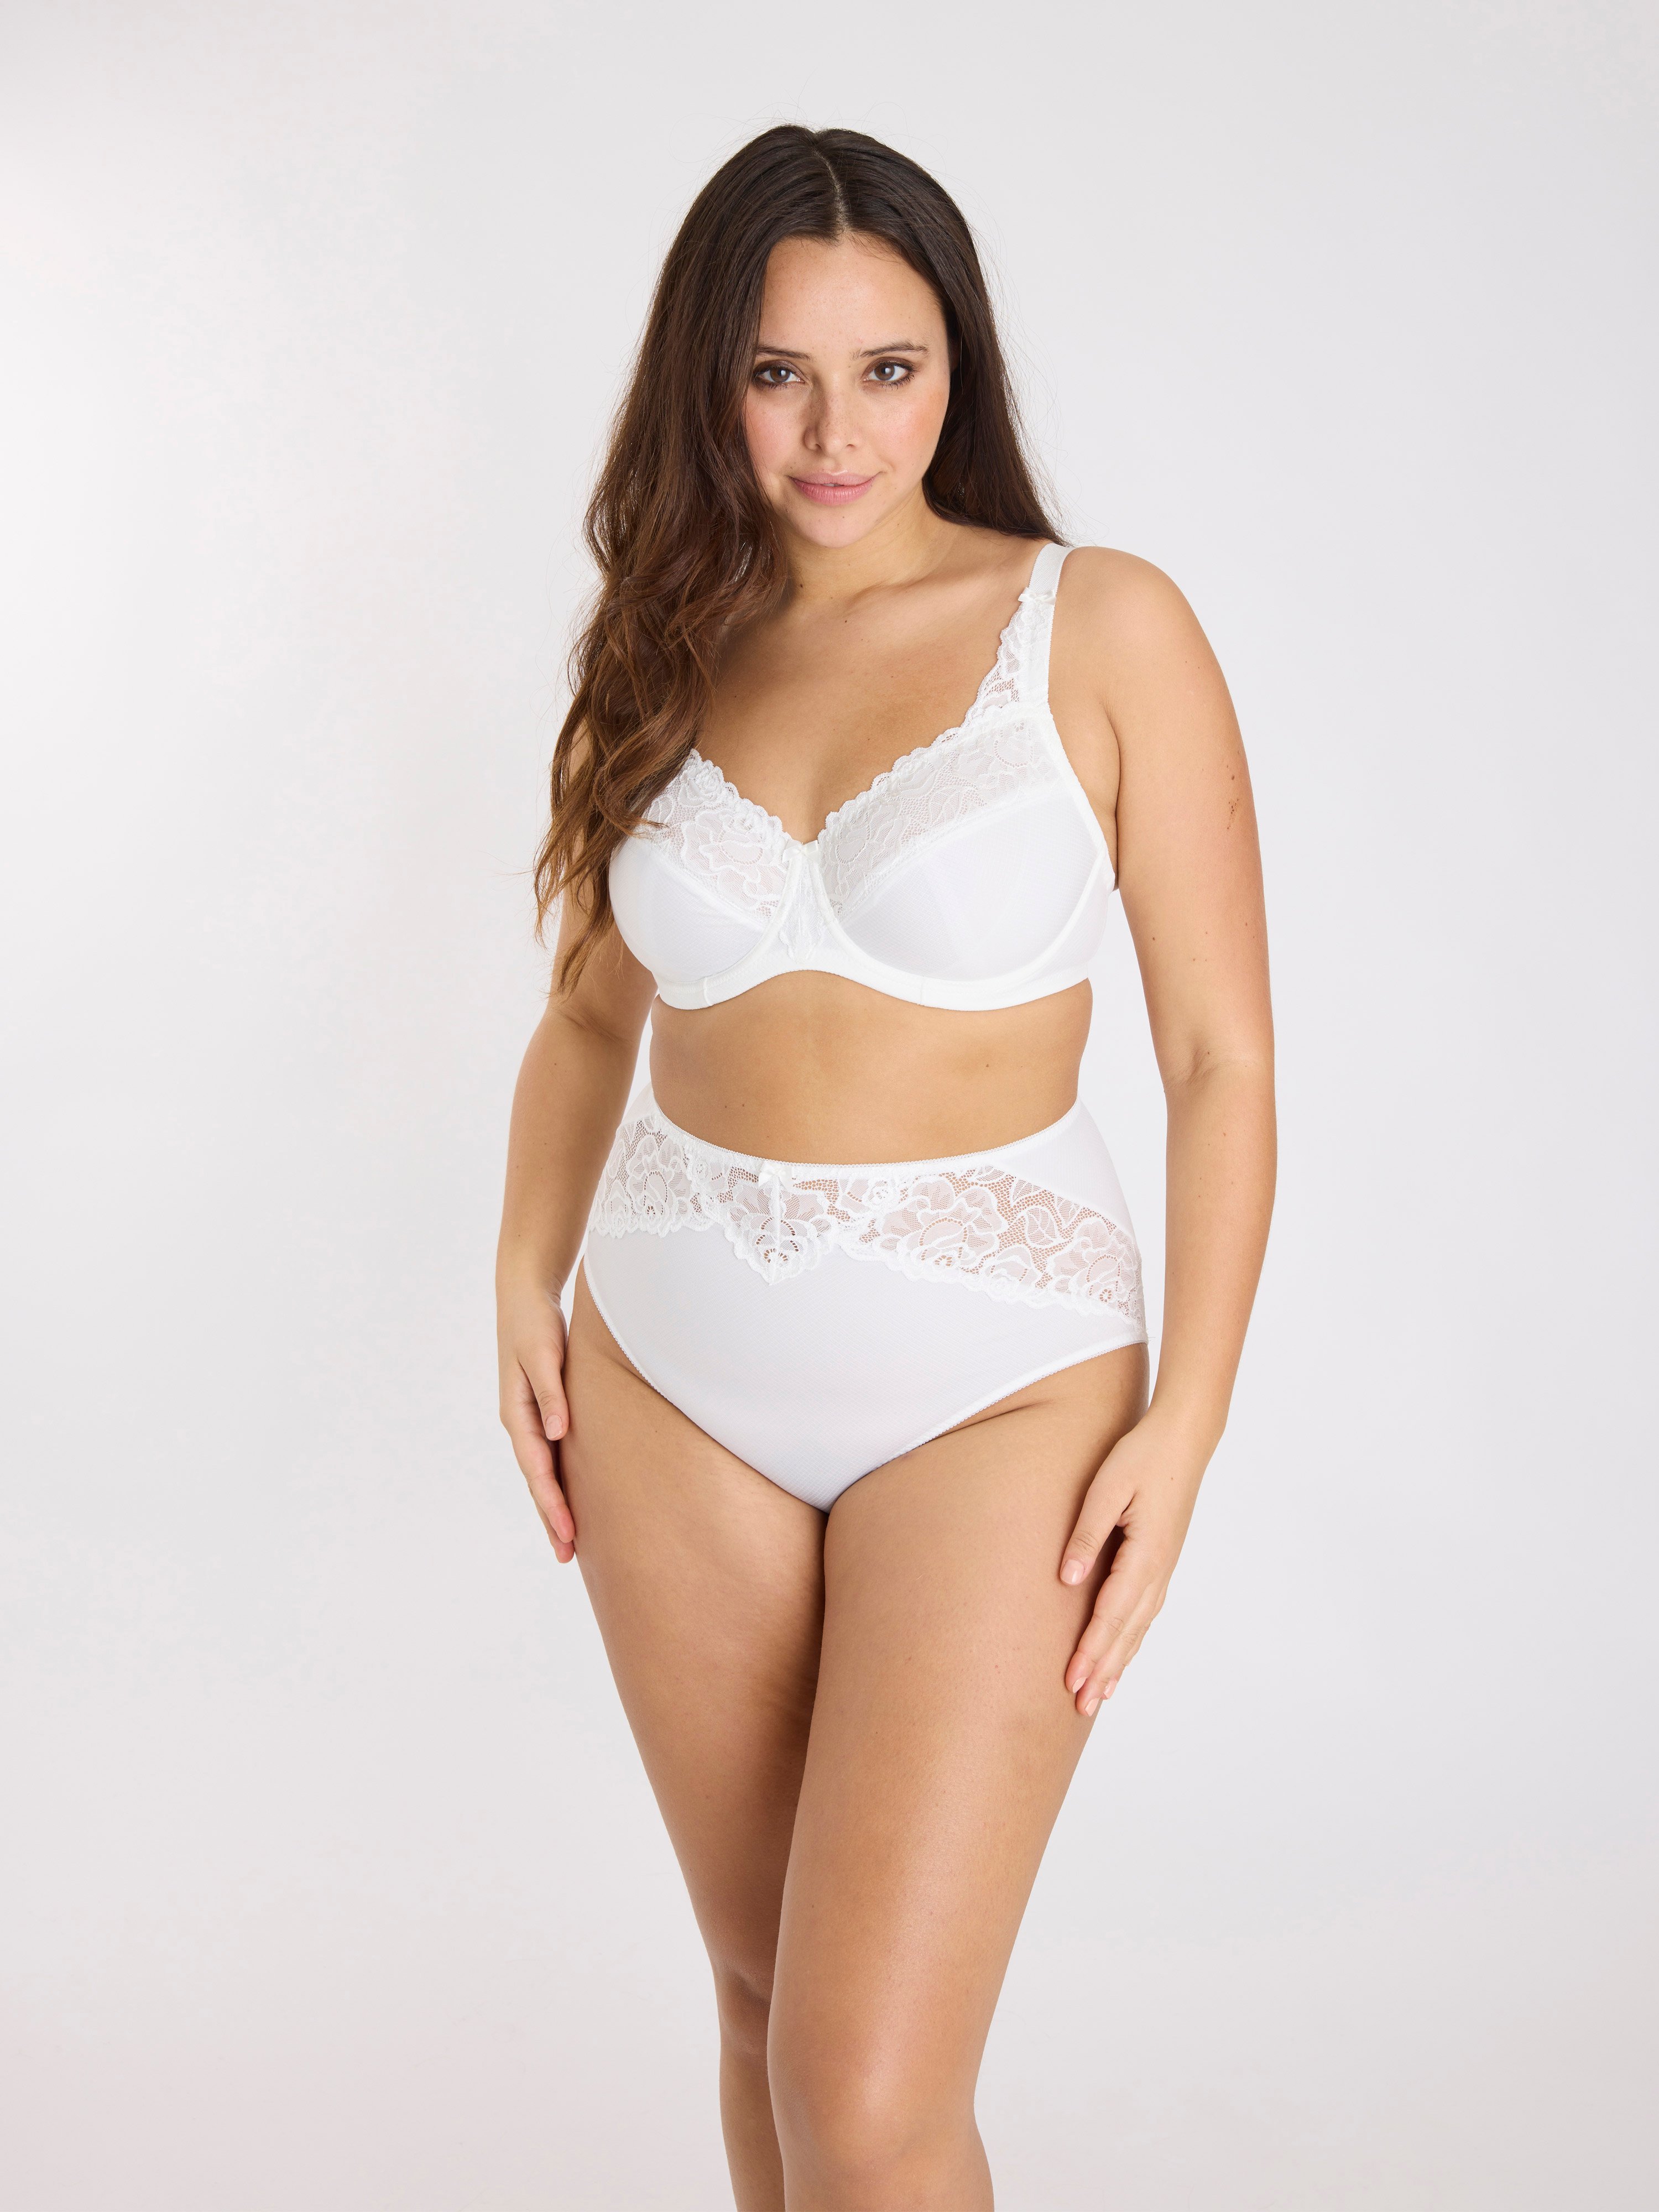 Florence Full Support Full Cup Bra - Ivory - CA$99.50 - CHANGE Lingerie